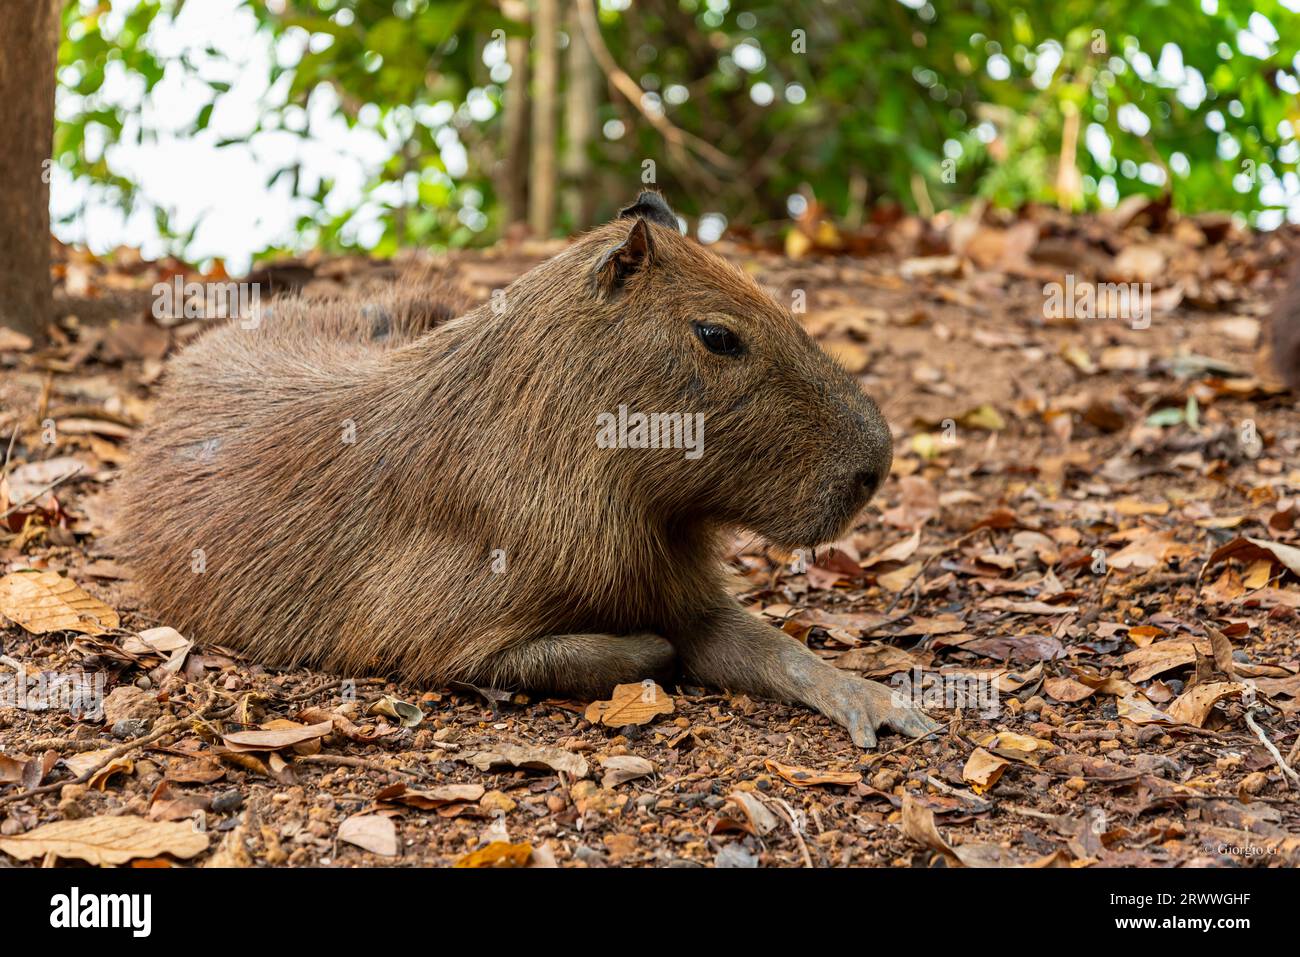 Profile picture of capybara resting on a dirt ground covere with dead leaves Stock Photo